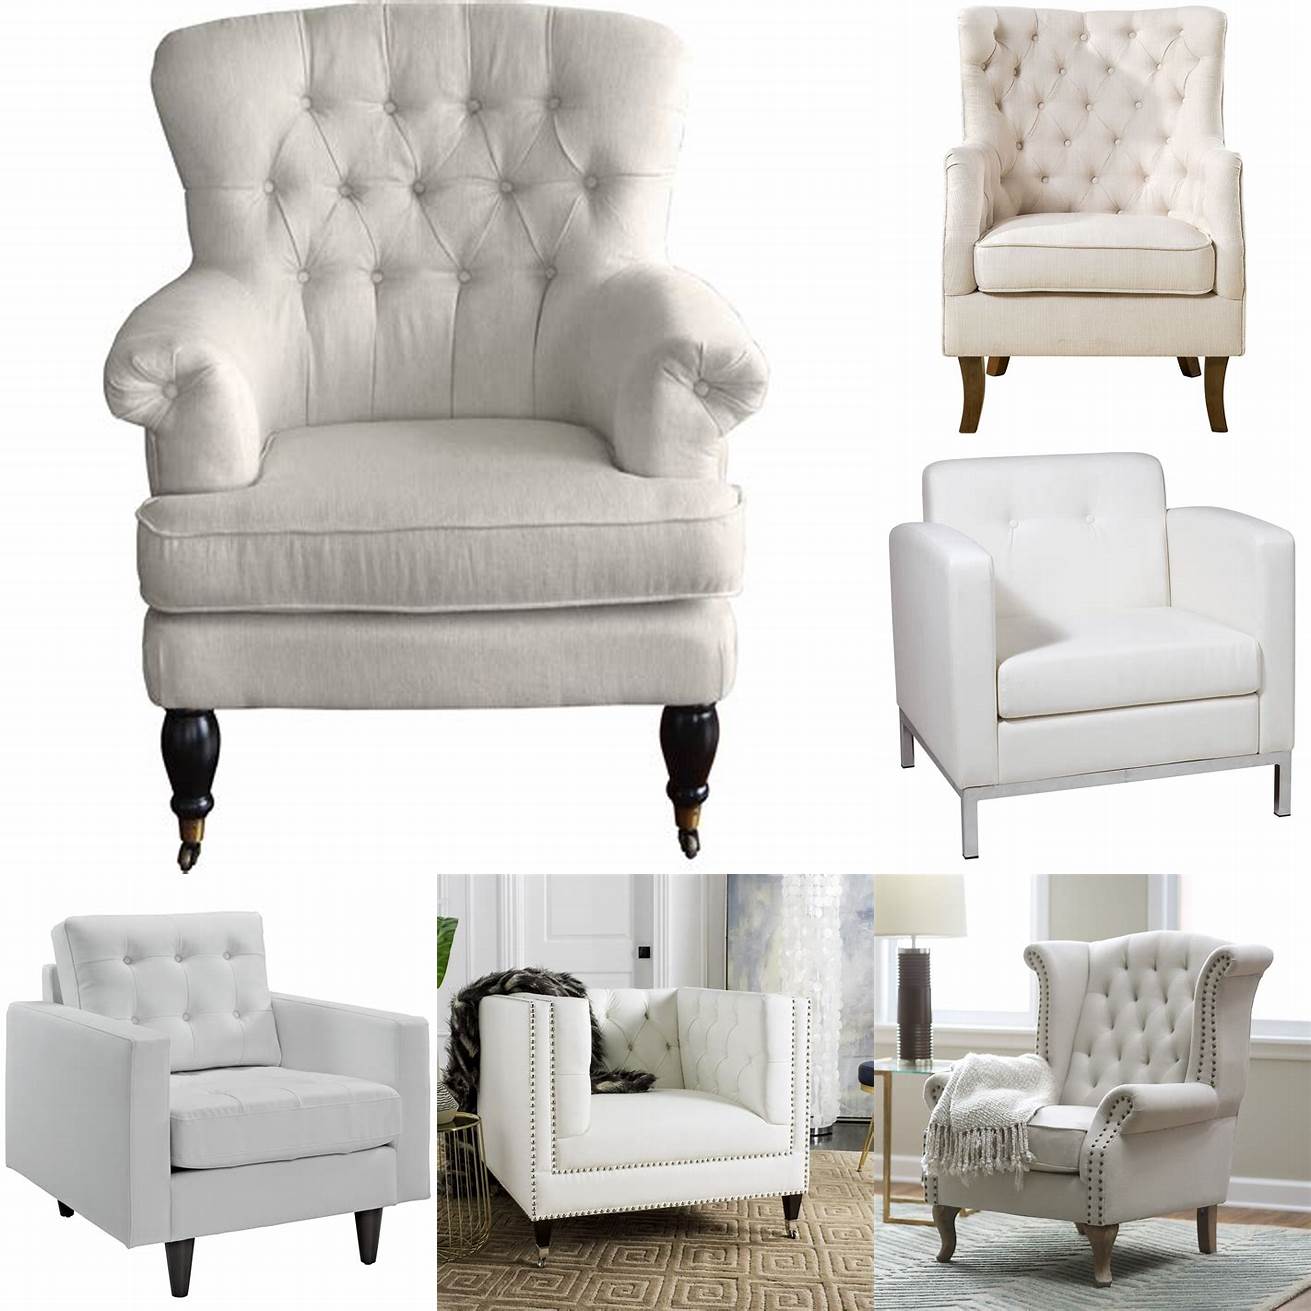 A white armchair with a tufted back